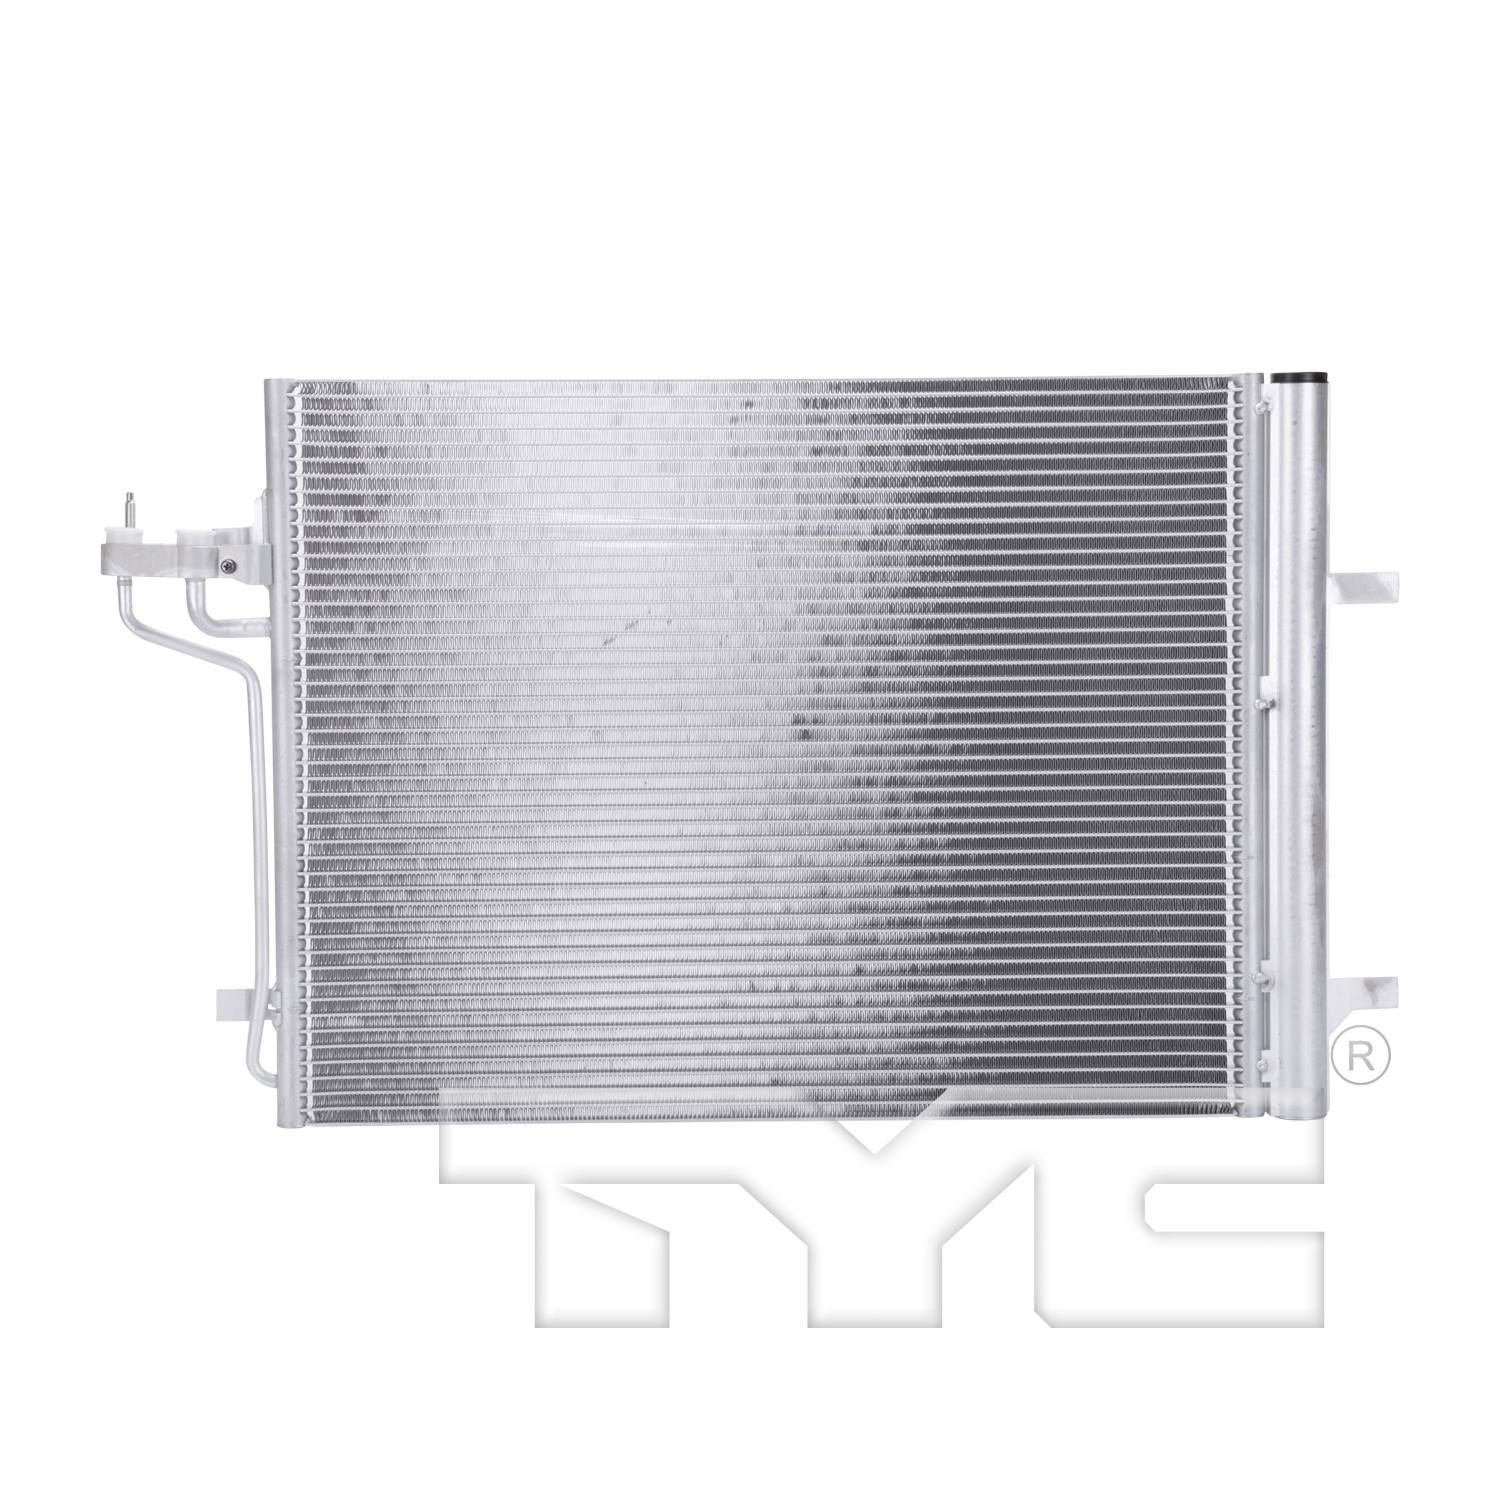 Aftermarket AC CONDENSERS for FORD - TRANSIT CONNECT, TRANSIT CONNECT,14-18,Air conditioning condenser